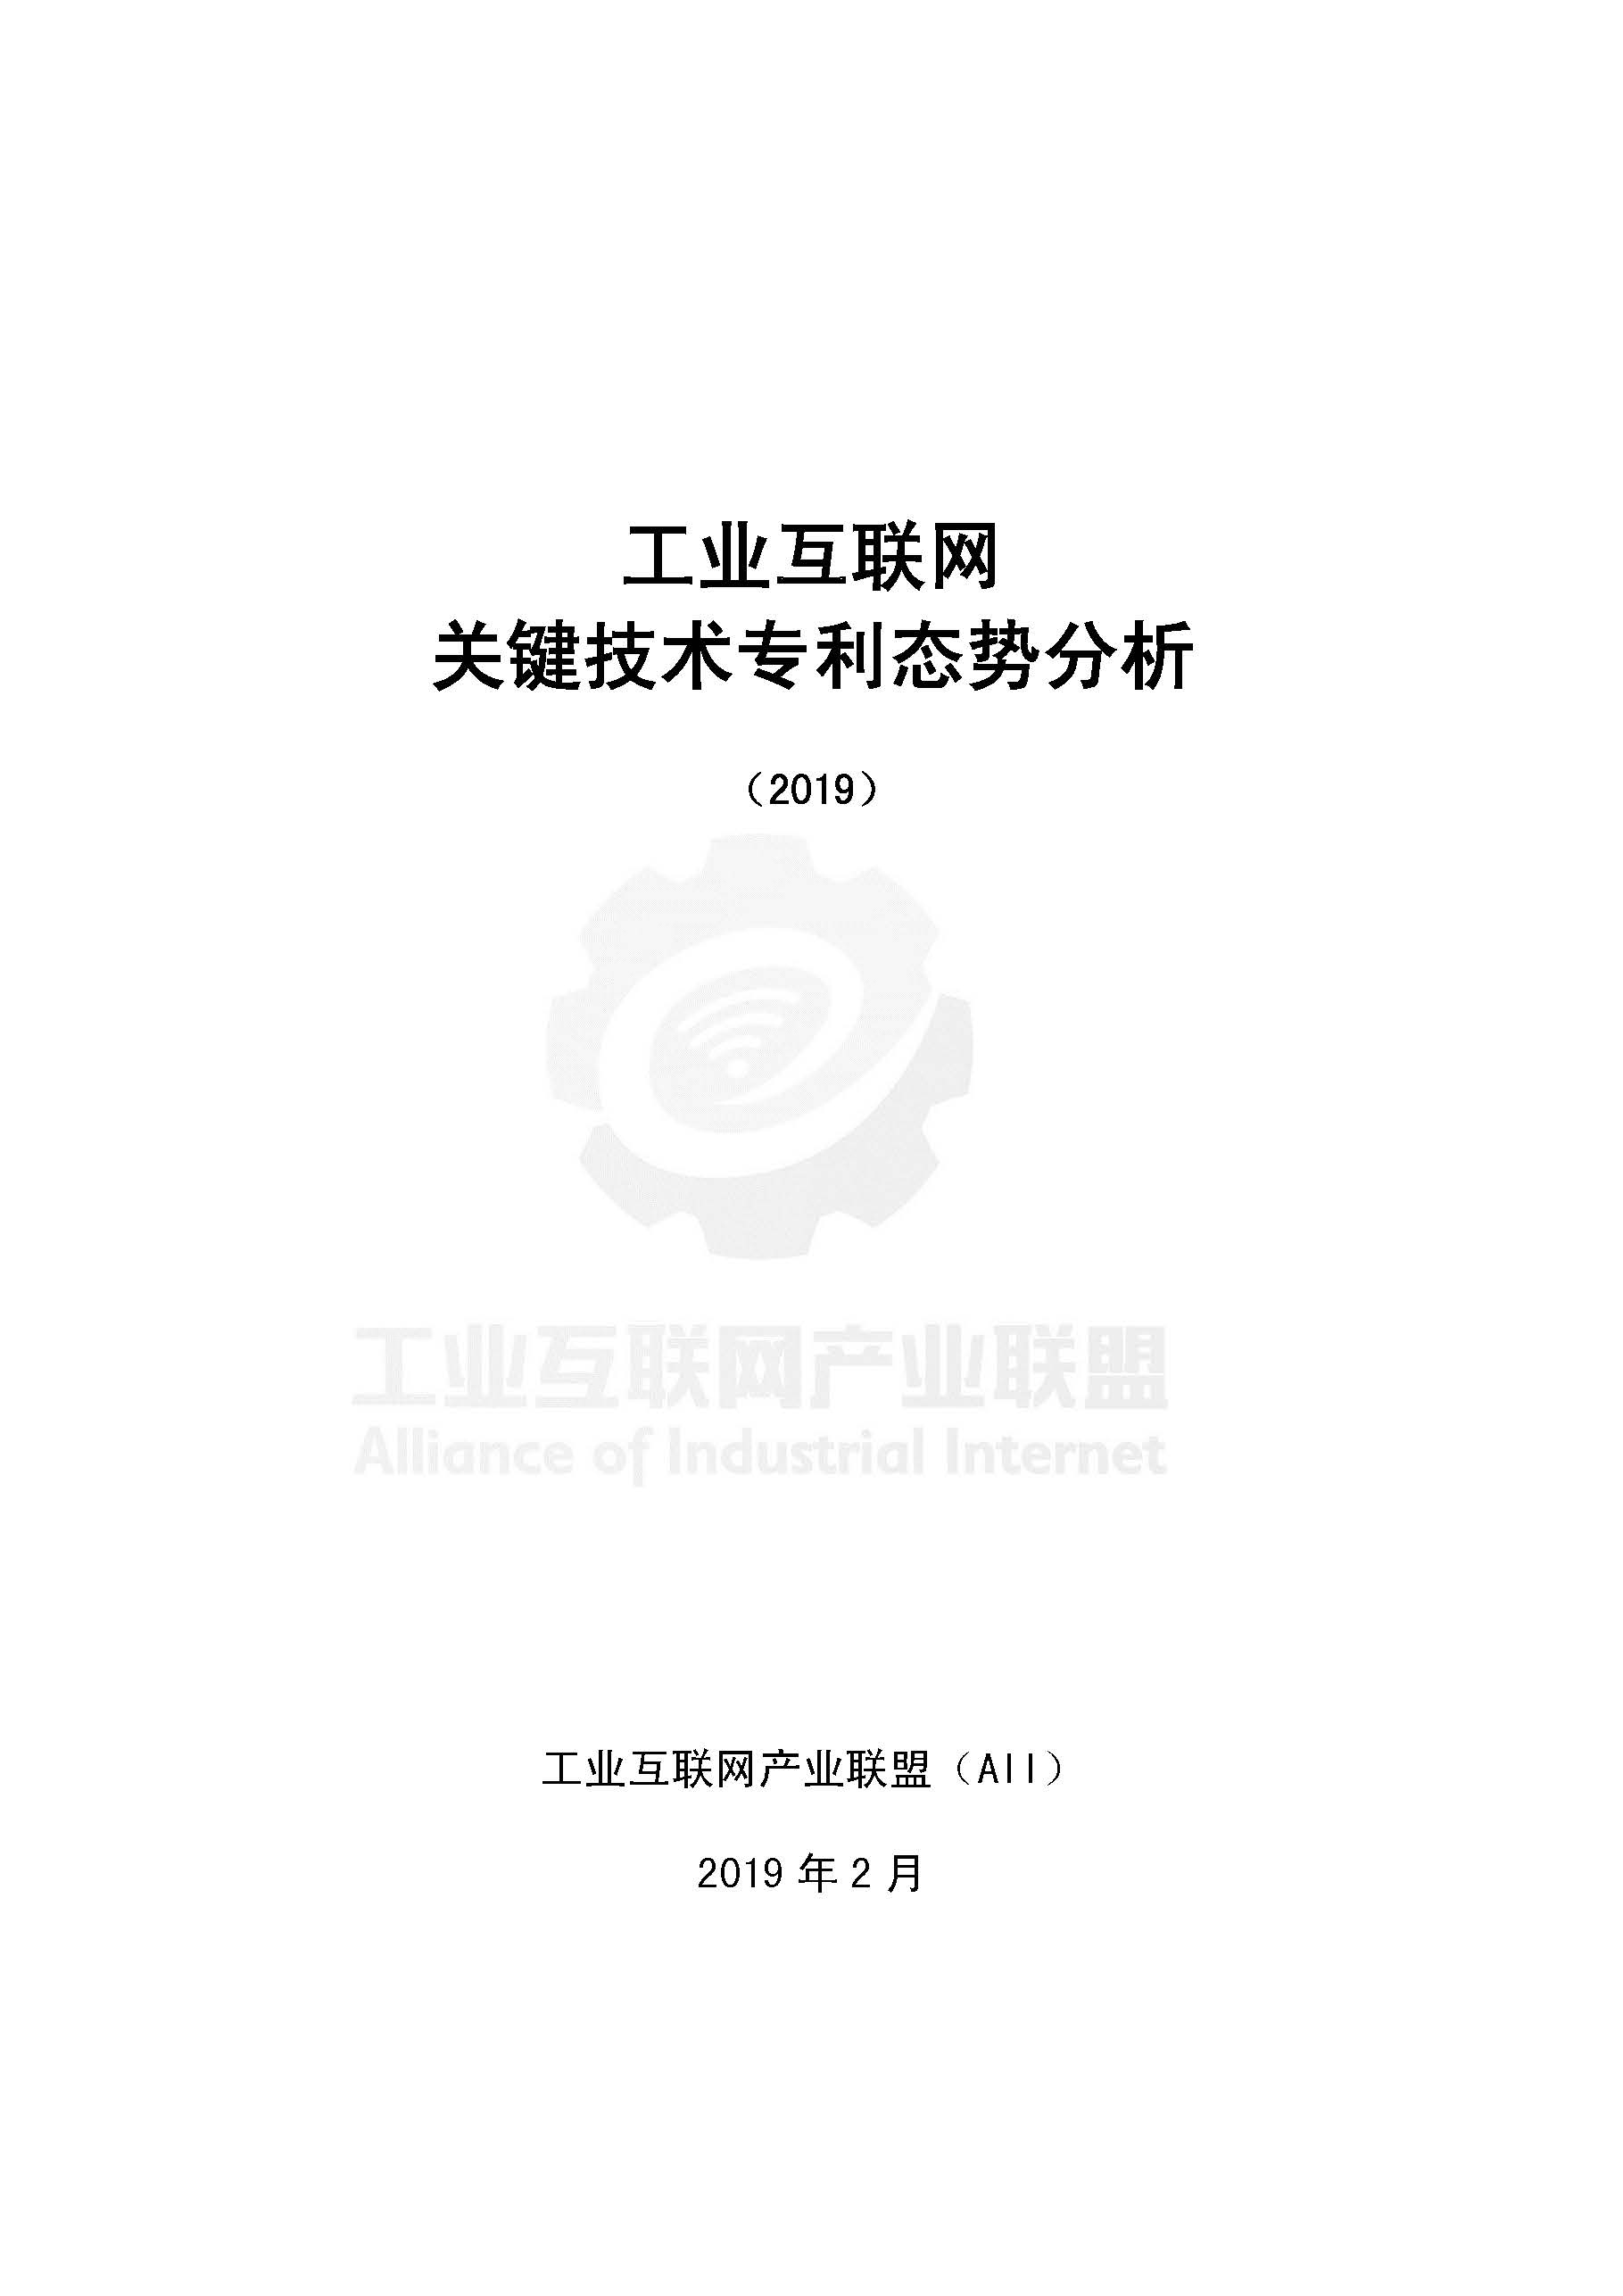 Pages from 工业互联网关键技术专利态势分析.jpg